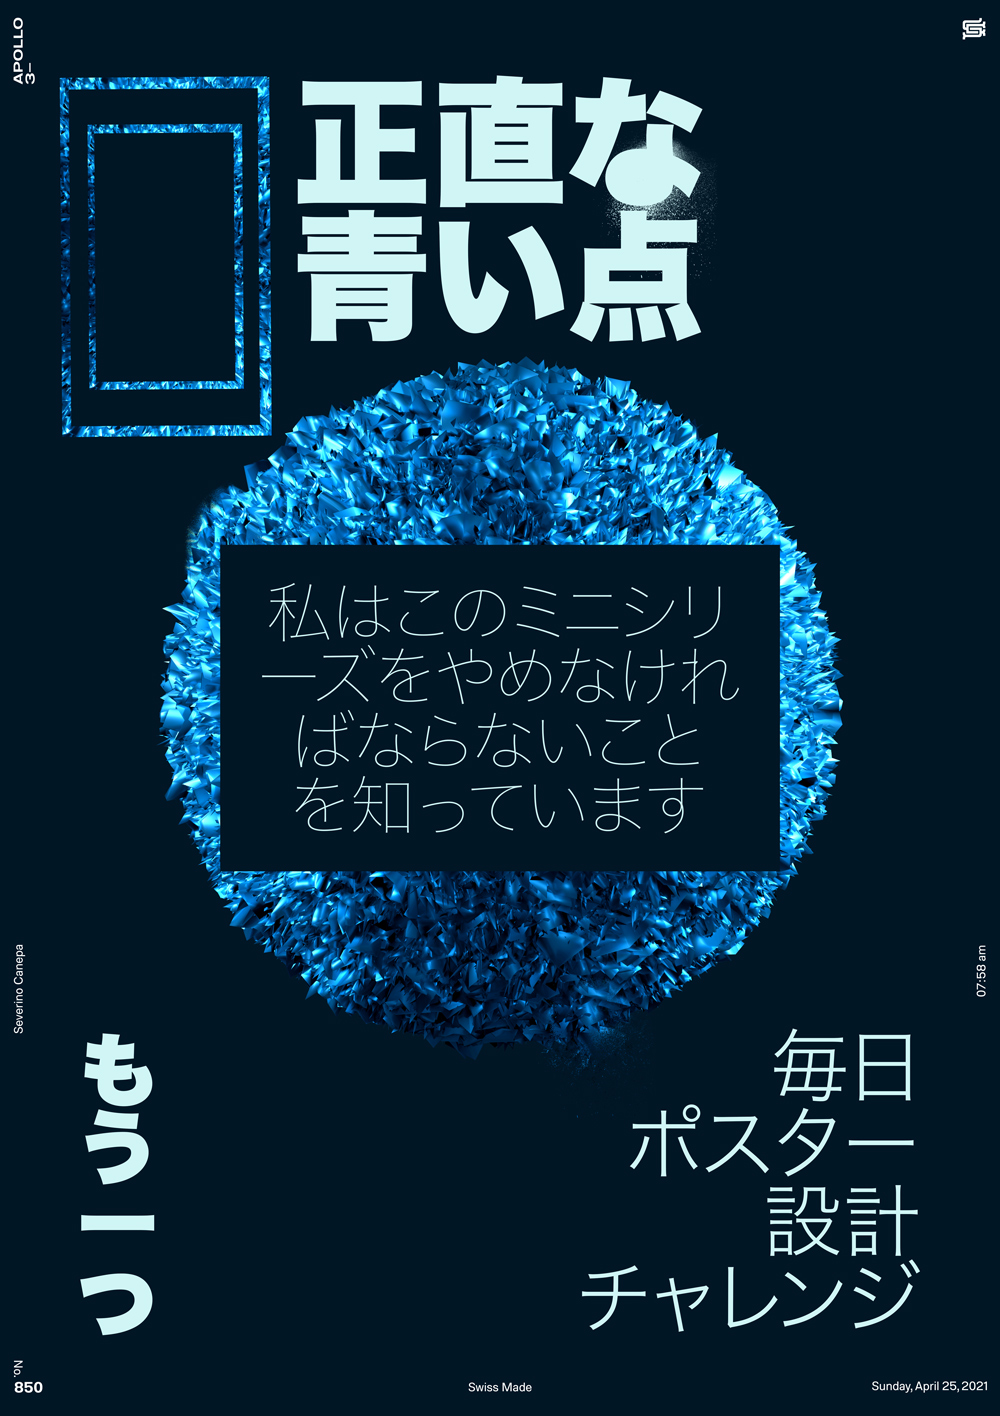 Graphic creation made with Japanese typography on a minimalist layout